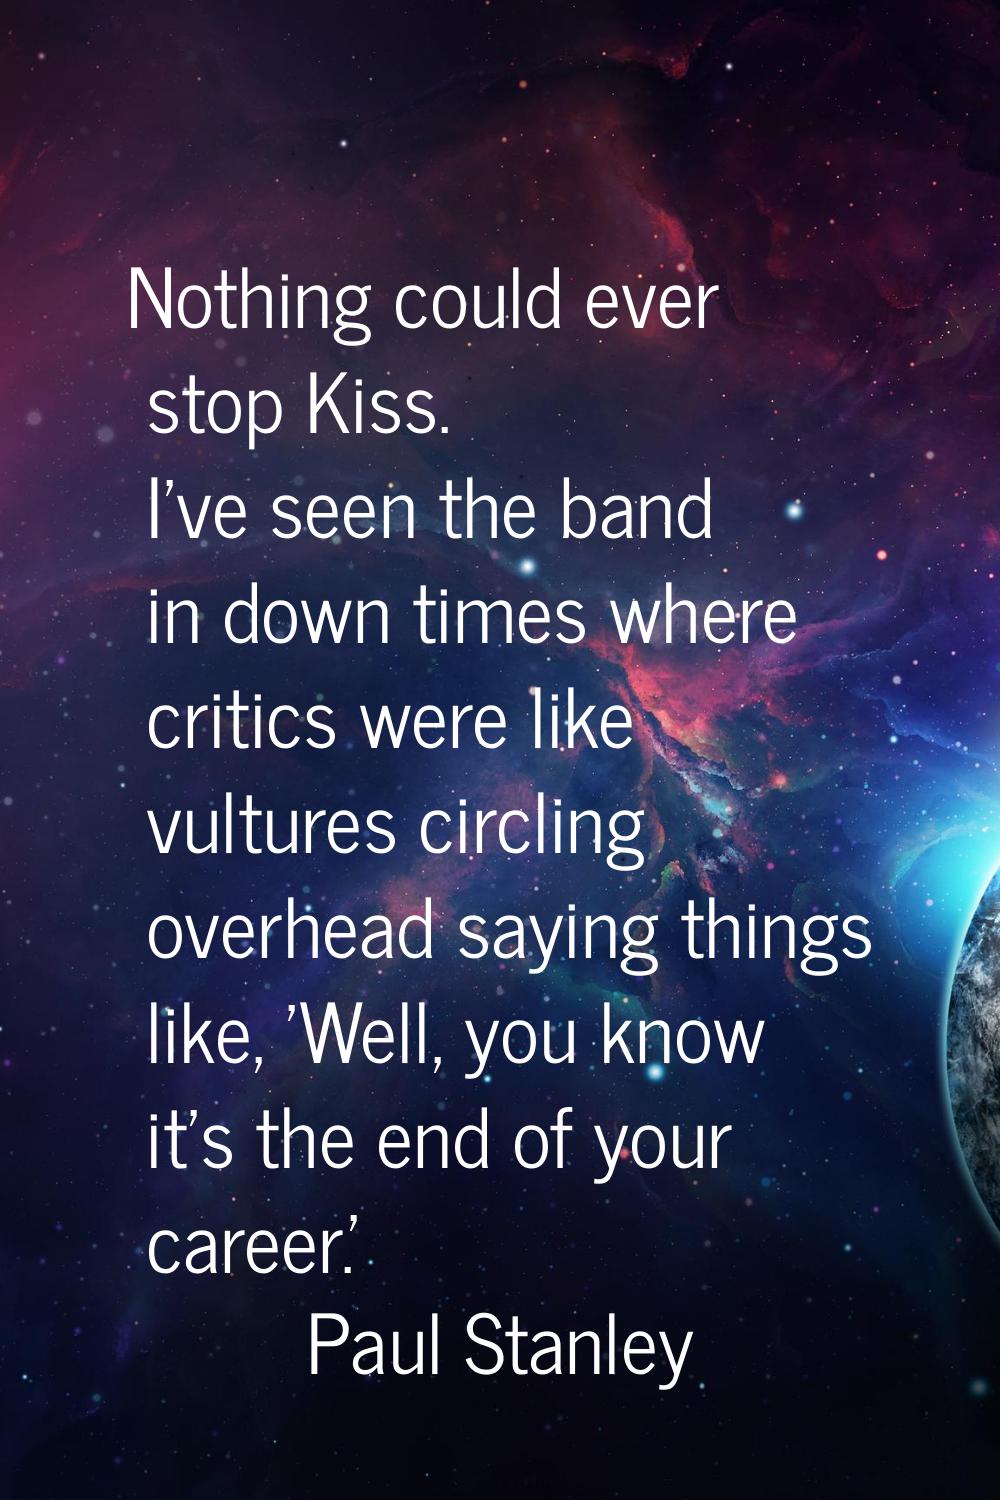 Nothing could ever stop Kiss. I've seen the band in down times where critics were like vultures cir